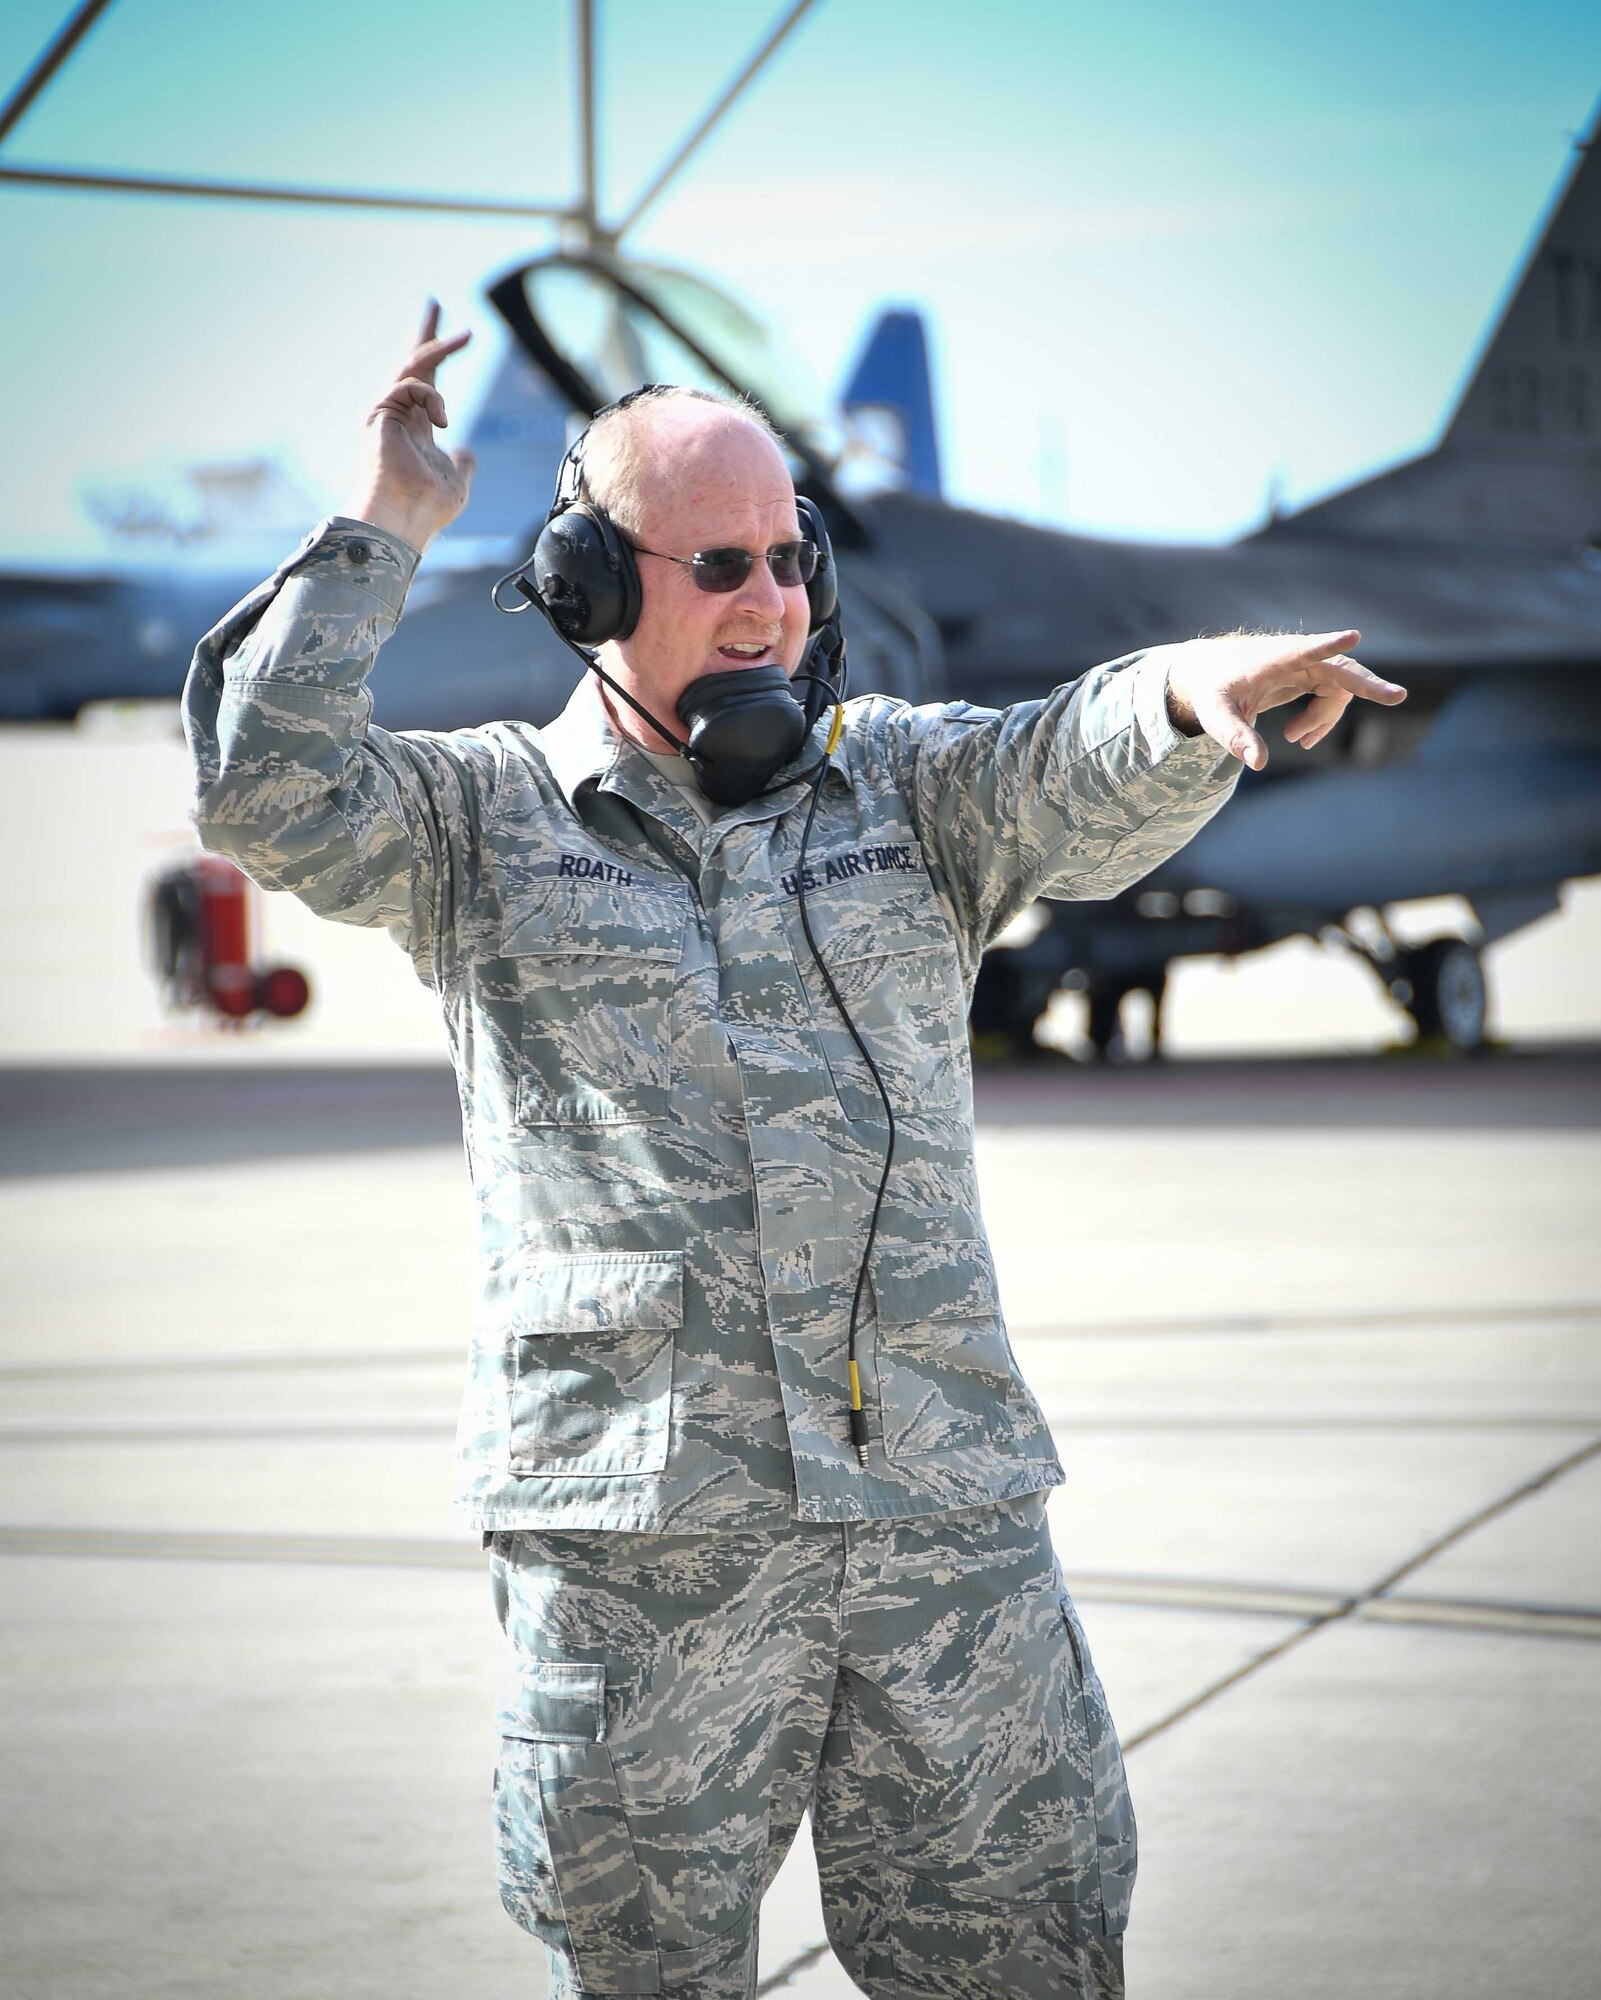 301st Fighter Wing Aircraft Maintenance Debrief and Crew Chief Master Sgt. Mark Roath prepares an F-16 for launch at Naval Air Station Fort Worth Joint Reserve Base, Texas on November 25, 2019. He’ll be retiring this month after 38 years of service to the Air Force.  (U.S. Air Force photo by Mr. Jeremy Roman)